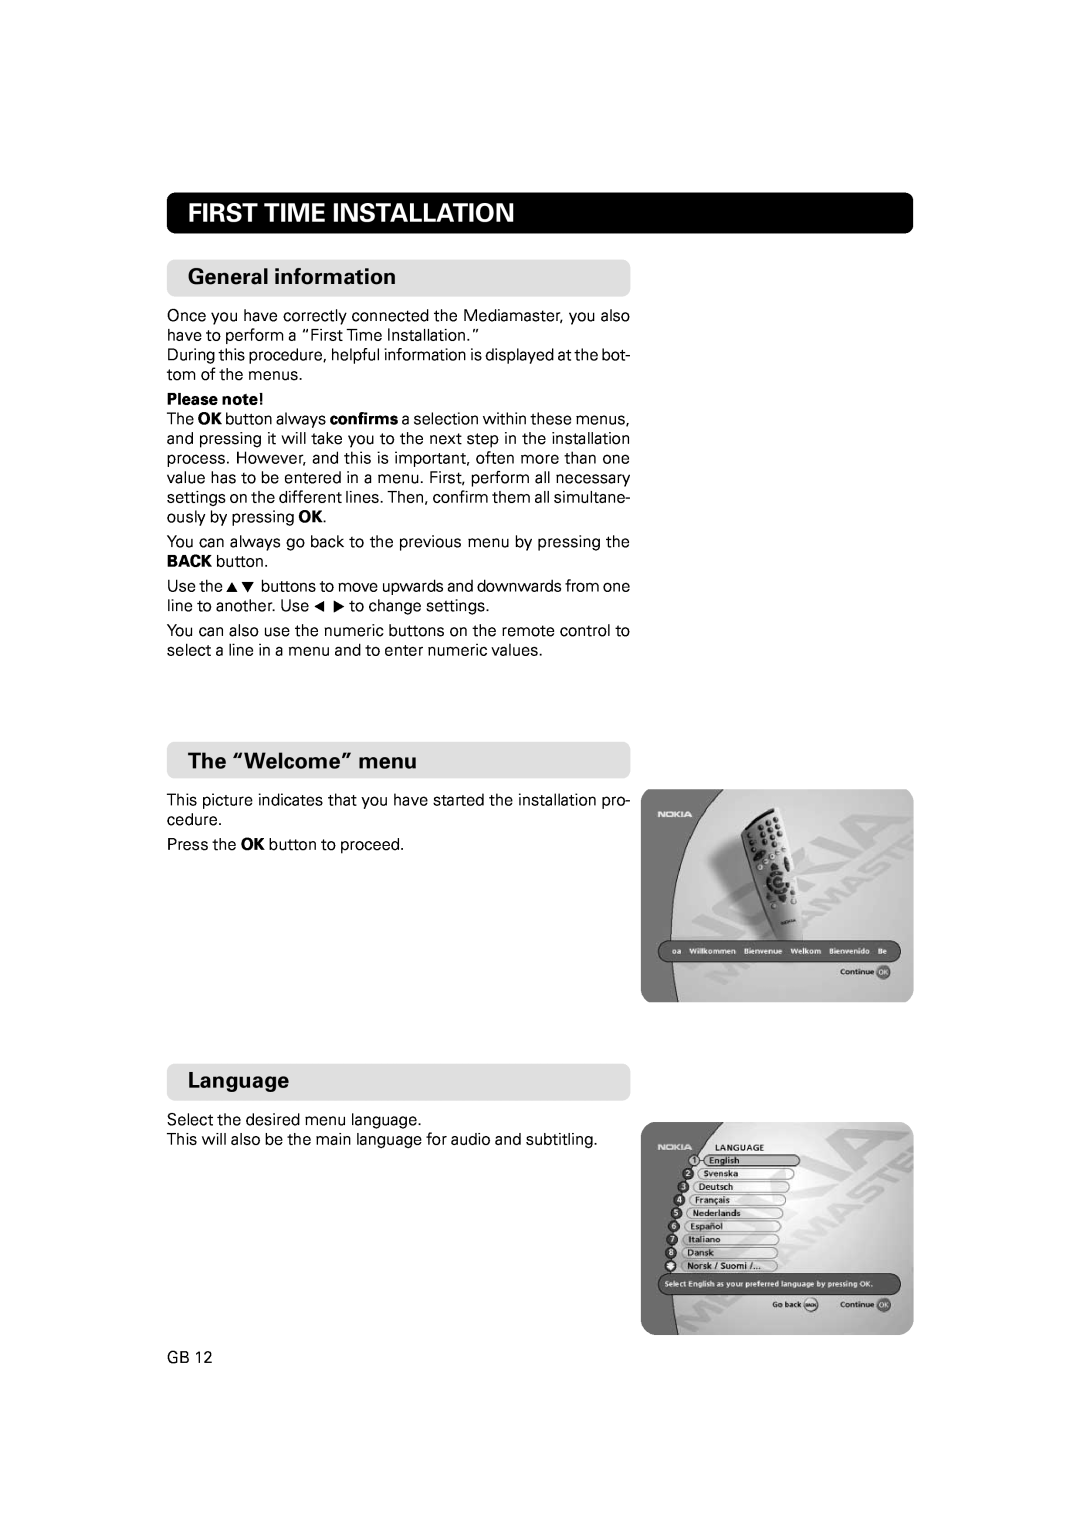 JA Audio 9902S manual First Time Installation, General information, The “Welcome” menu, Language, Please note 